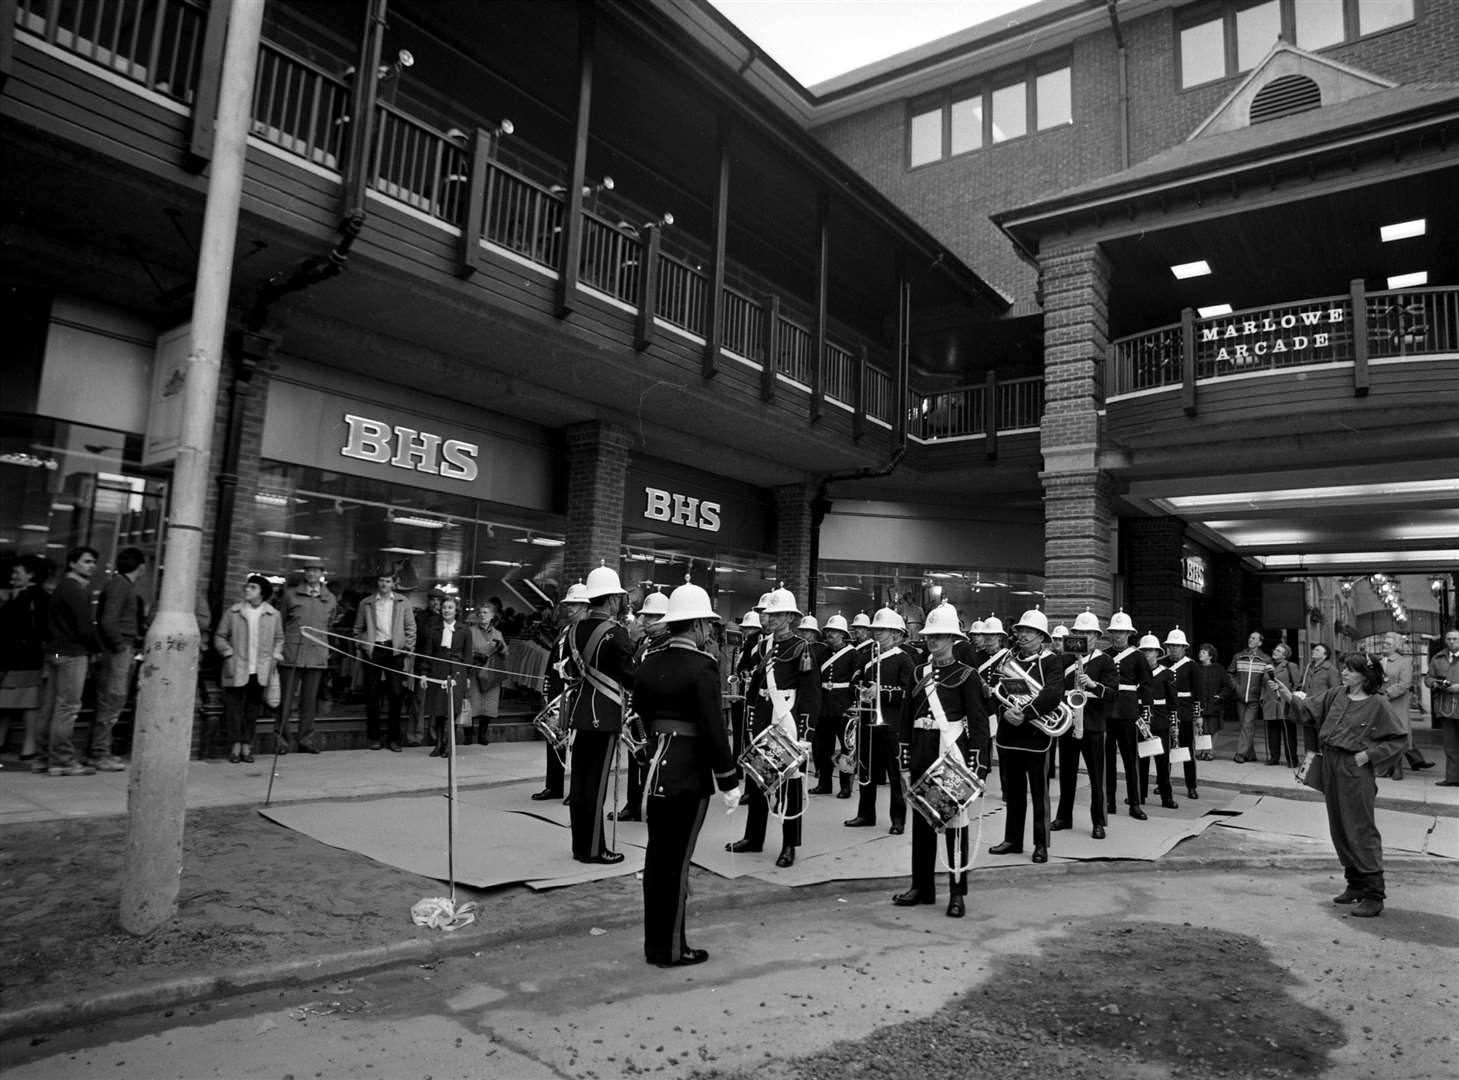 The Royal Marines band at the Marlowe Arcade opening in 1985. BHS is now occupied by Primark